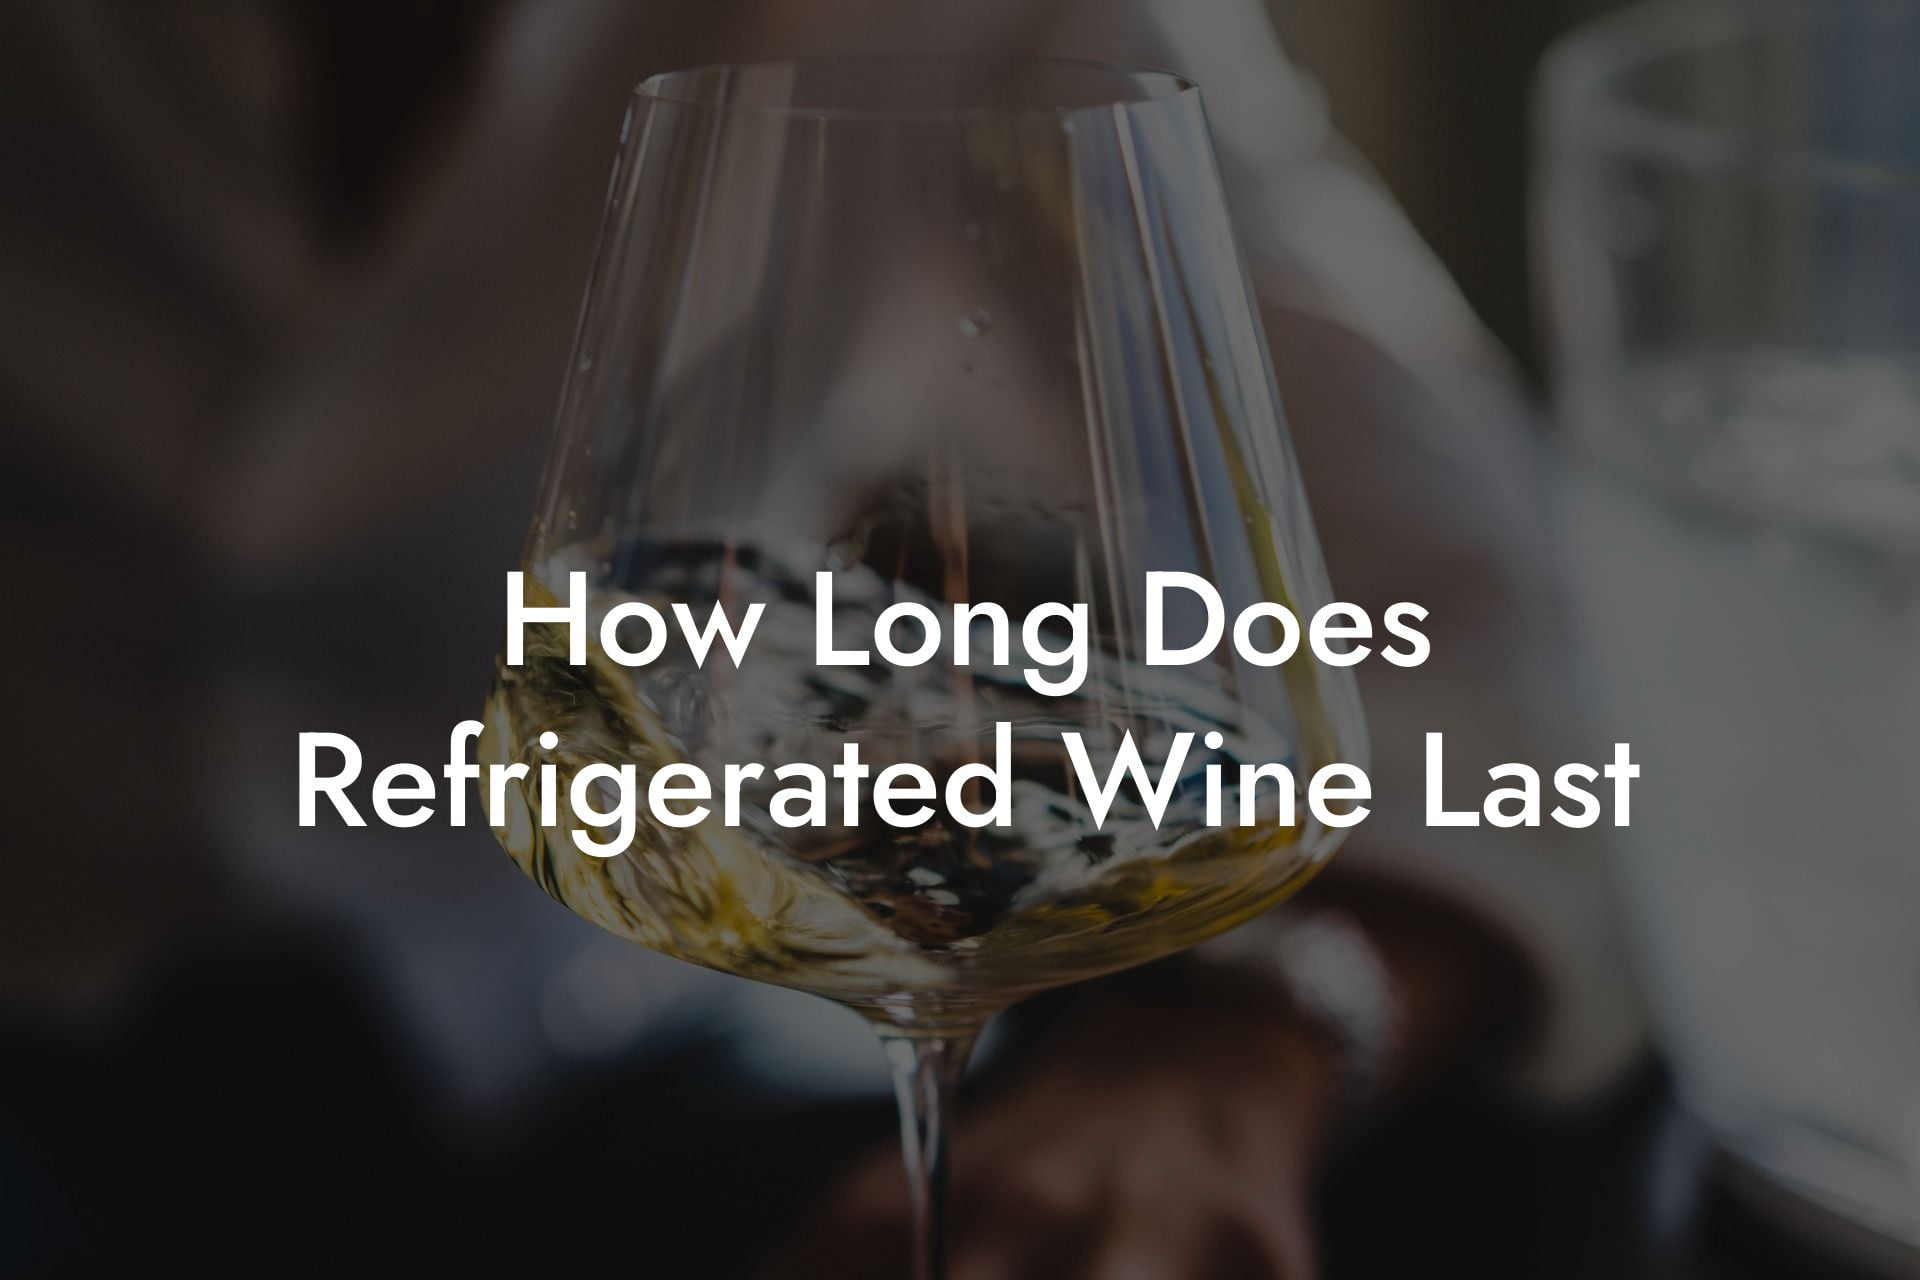 How Long Does Refrigerated Wine Last